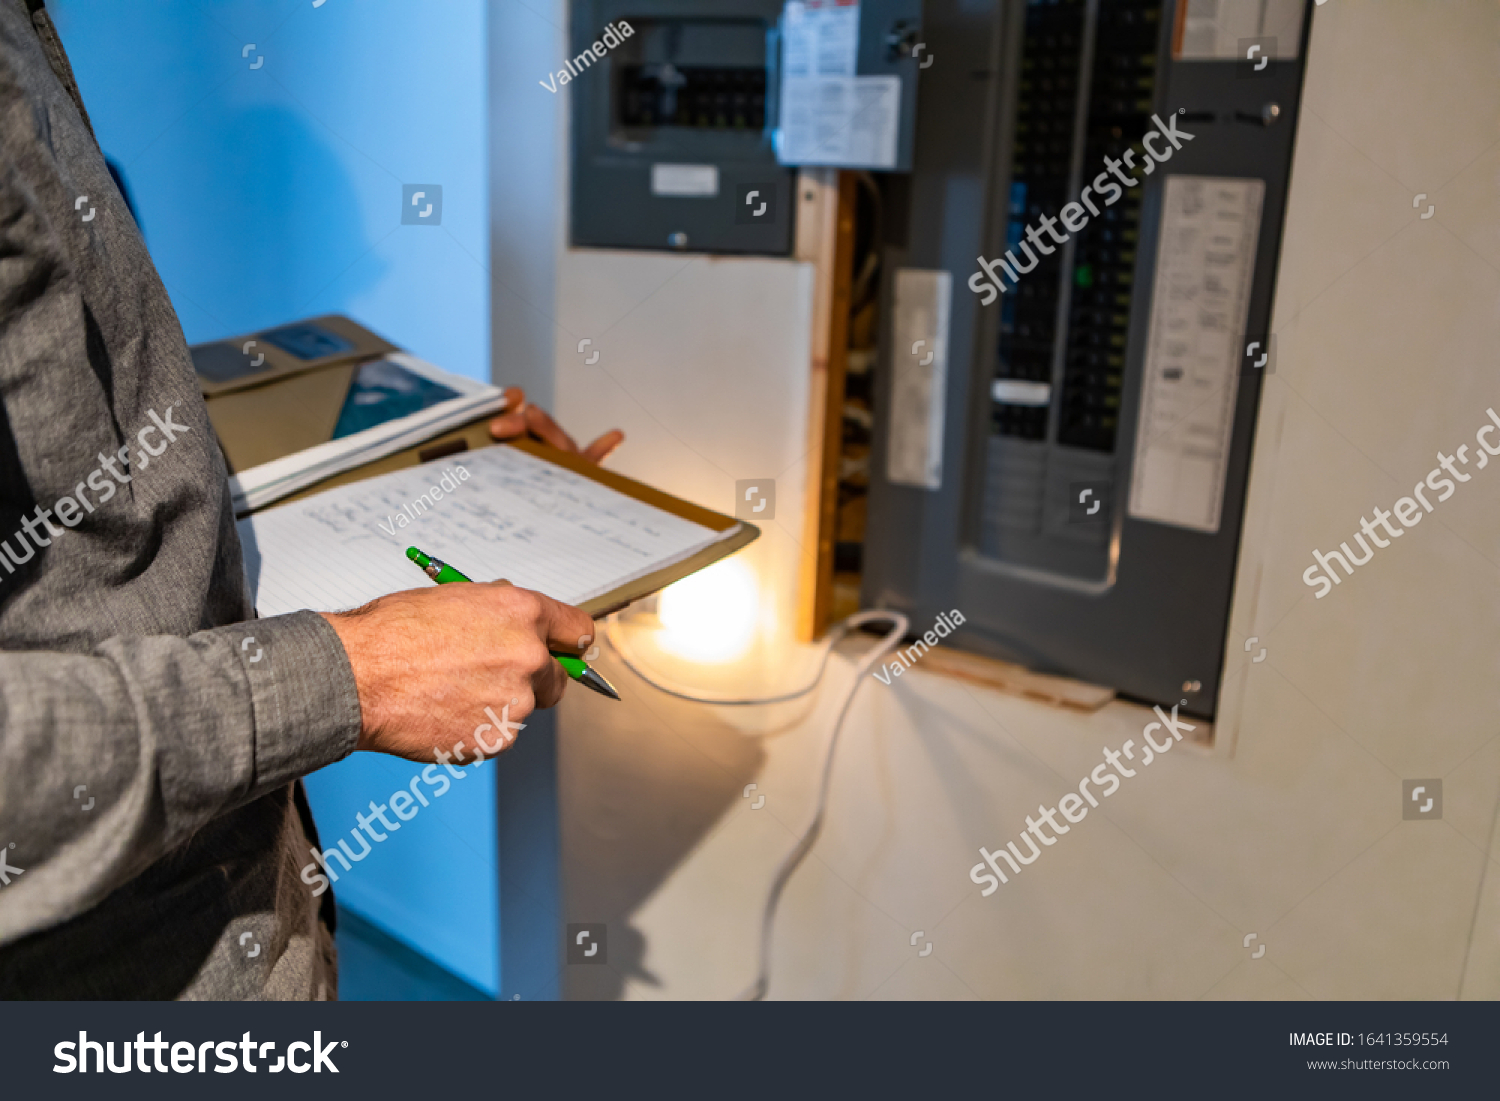 home Inspector in front of electric distribution board during inspection, selective focus and close up on man's hands as he holding notebook and pen #1641359554